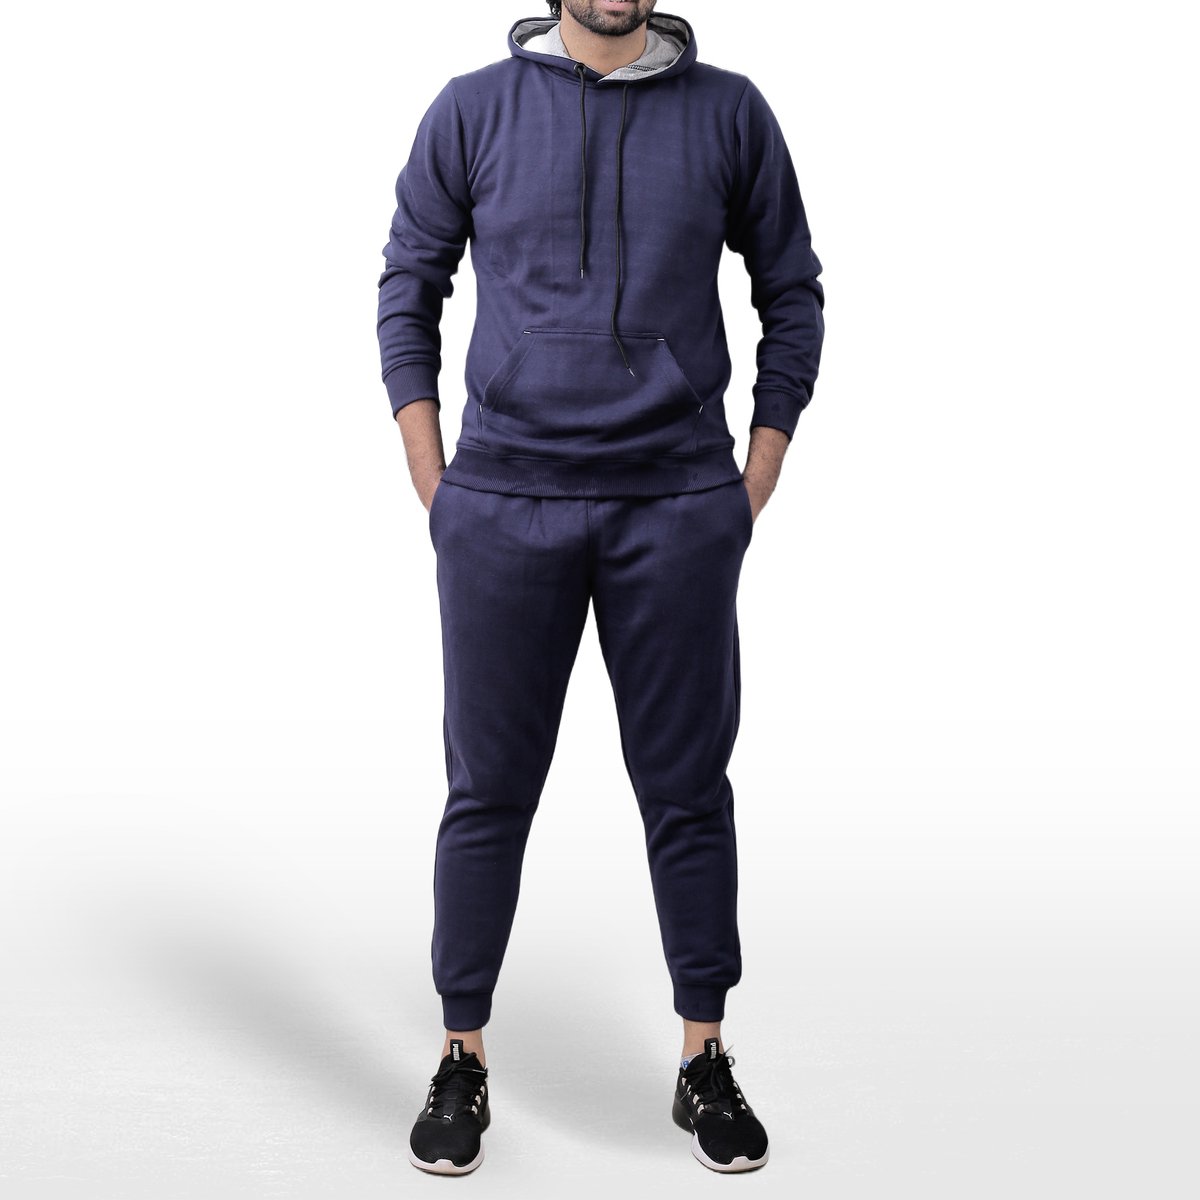 ICONICX Mens Plain Tracksuit Fleece Pullover Hoodie Pants Hooded Sweatshirt with Trousers Cotton Jogging Suit Exercise, Fitness, Boxing MMA, NAVY